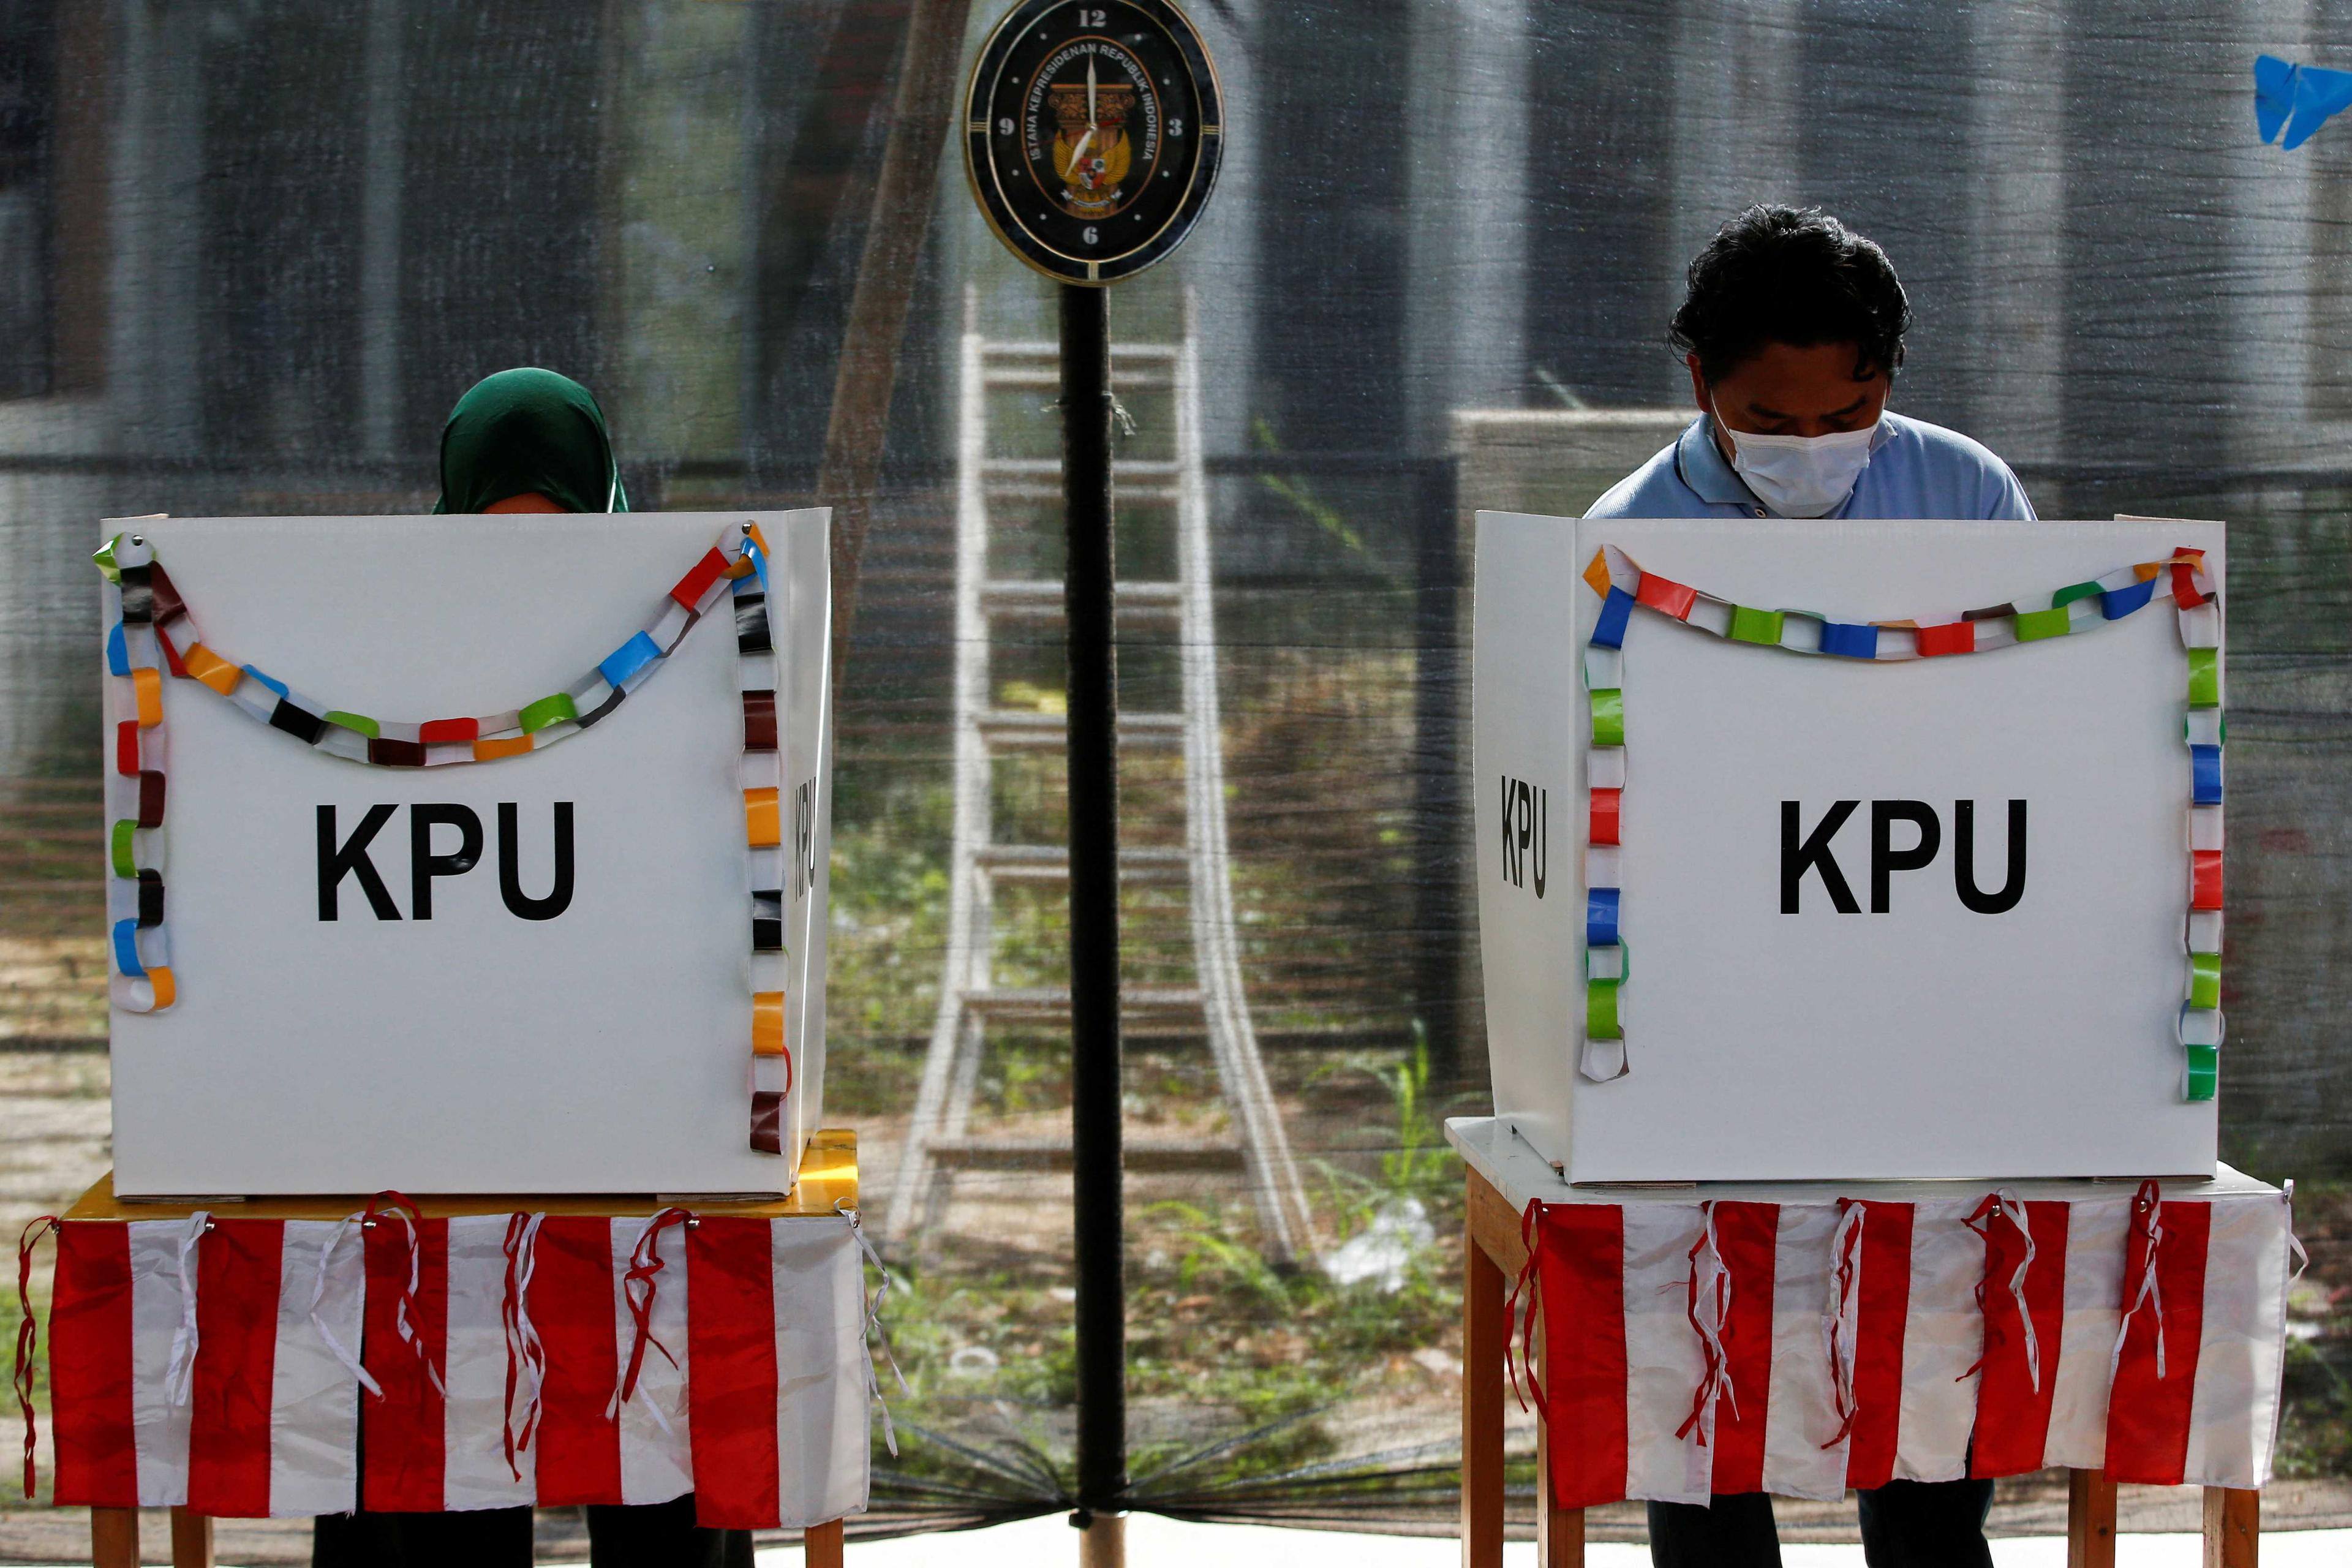 Voters wearing protective masks mark their ballots at a polling booth during regional elections in Tangerang, near Jakarta, Indonesia, Dec 9, 2020. Photo: Reuters